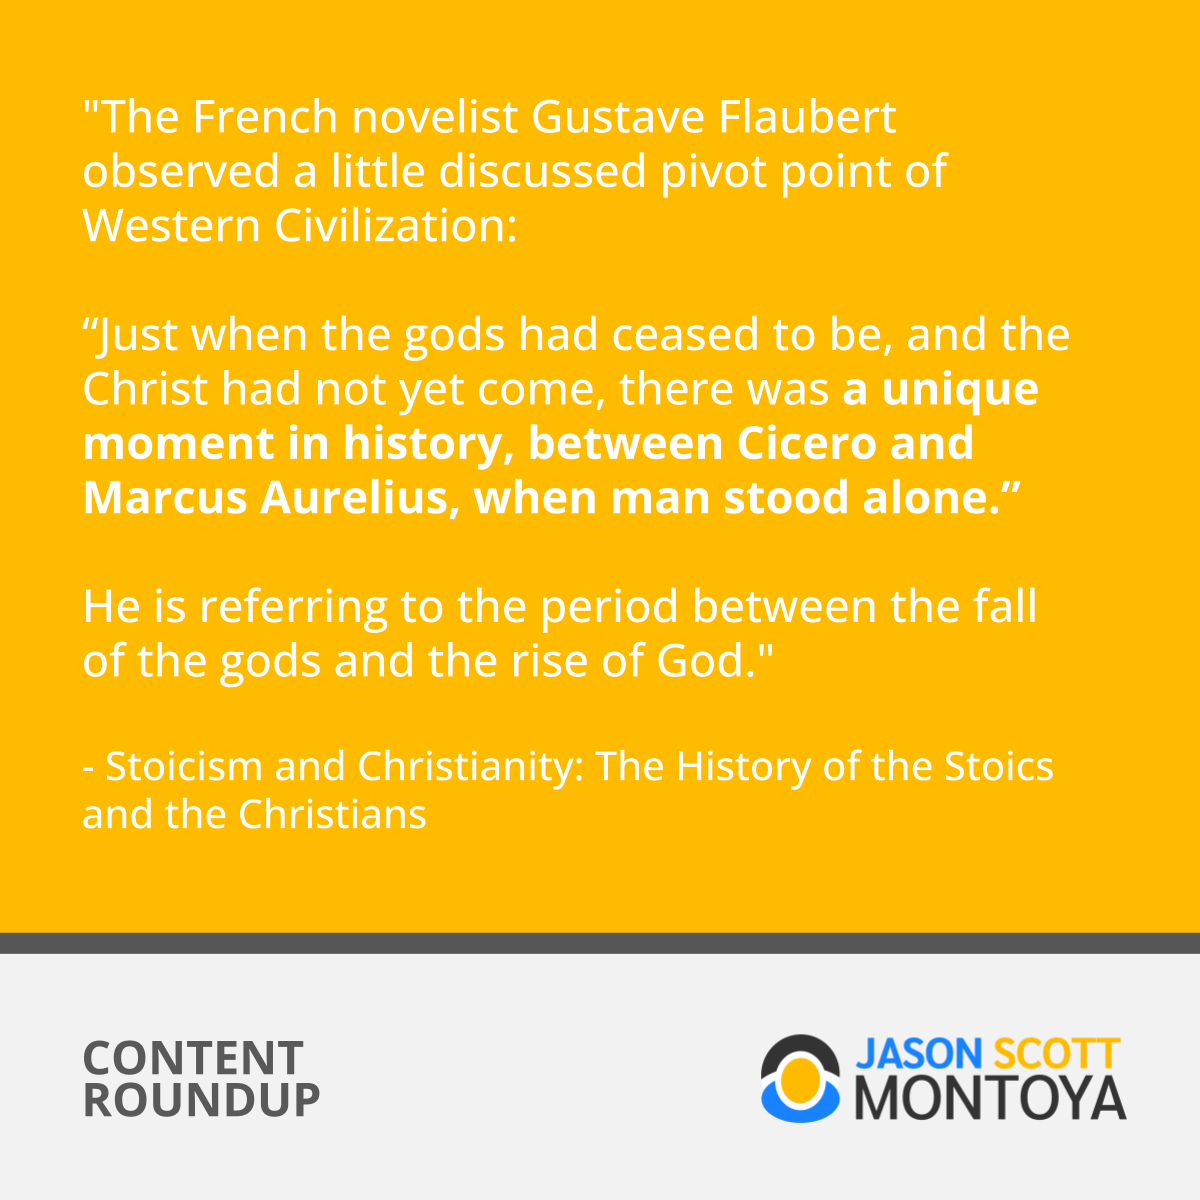 "The French novelist Gustave Flaubert observed a little discussed pivot point of Western Civilization: “Just when the gods had ceased to be, and the Christ had not yet come, there was a unique moment in history, between Cicero and Marcus Aurelius, when man stood alone.” He is referring to the period between the fall of the gods and the rise of God."